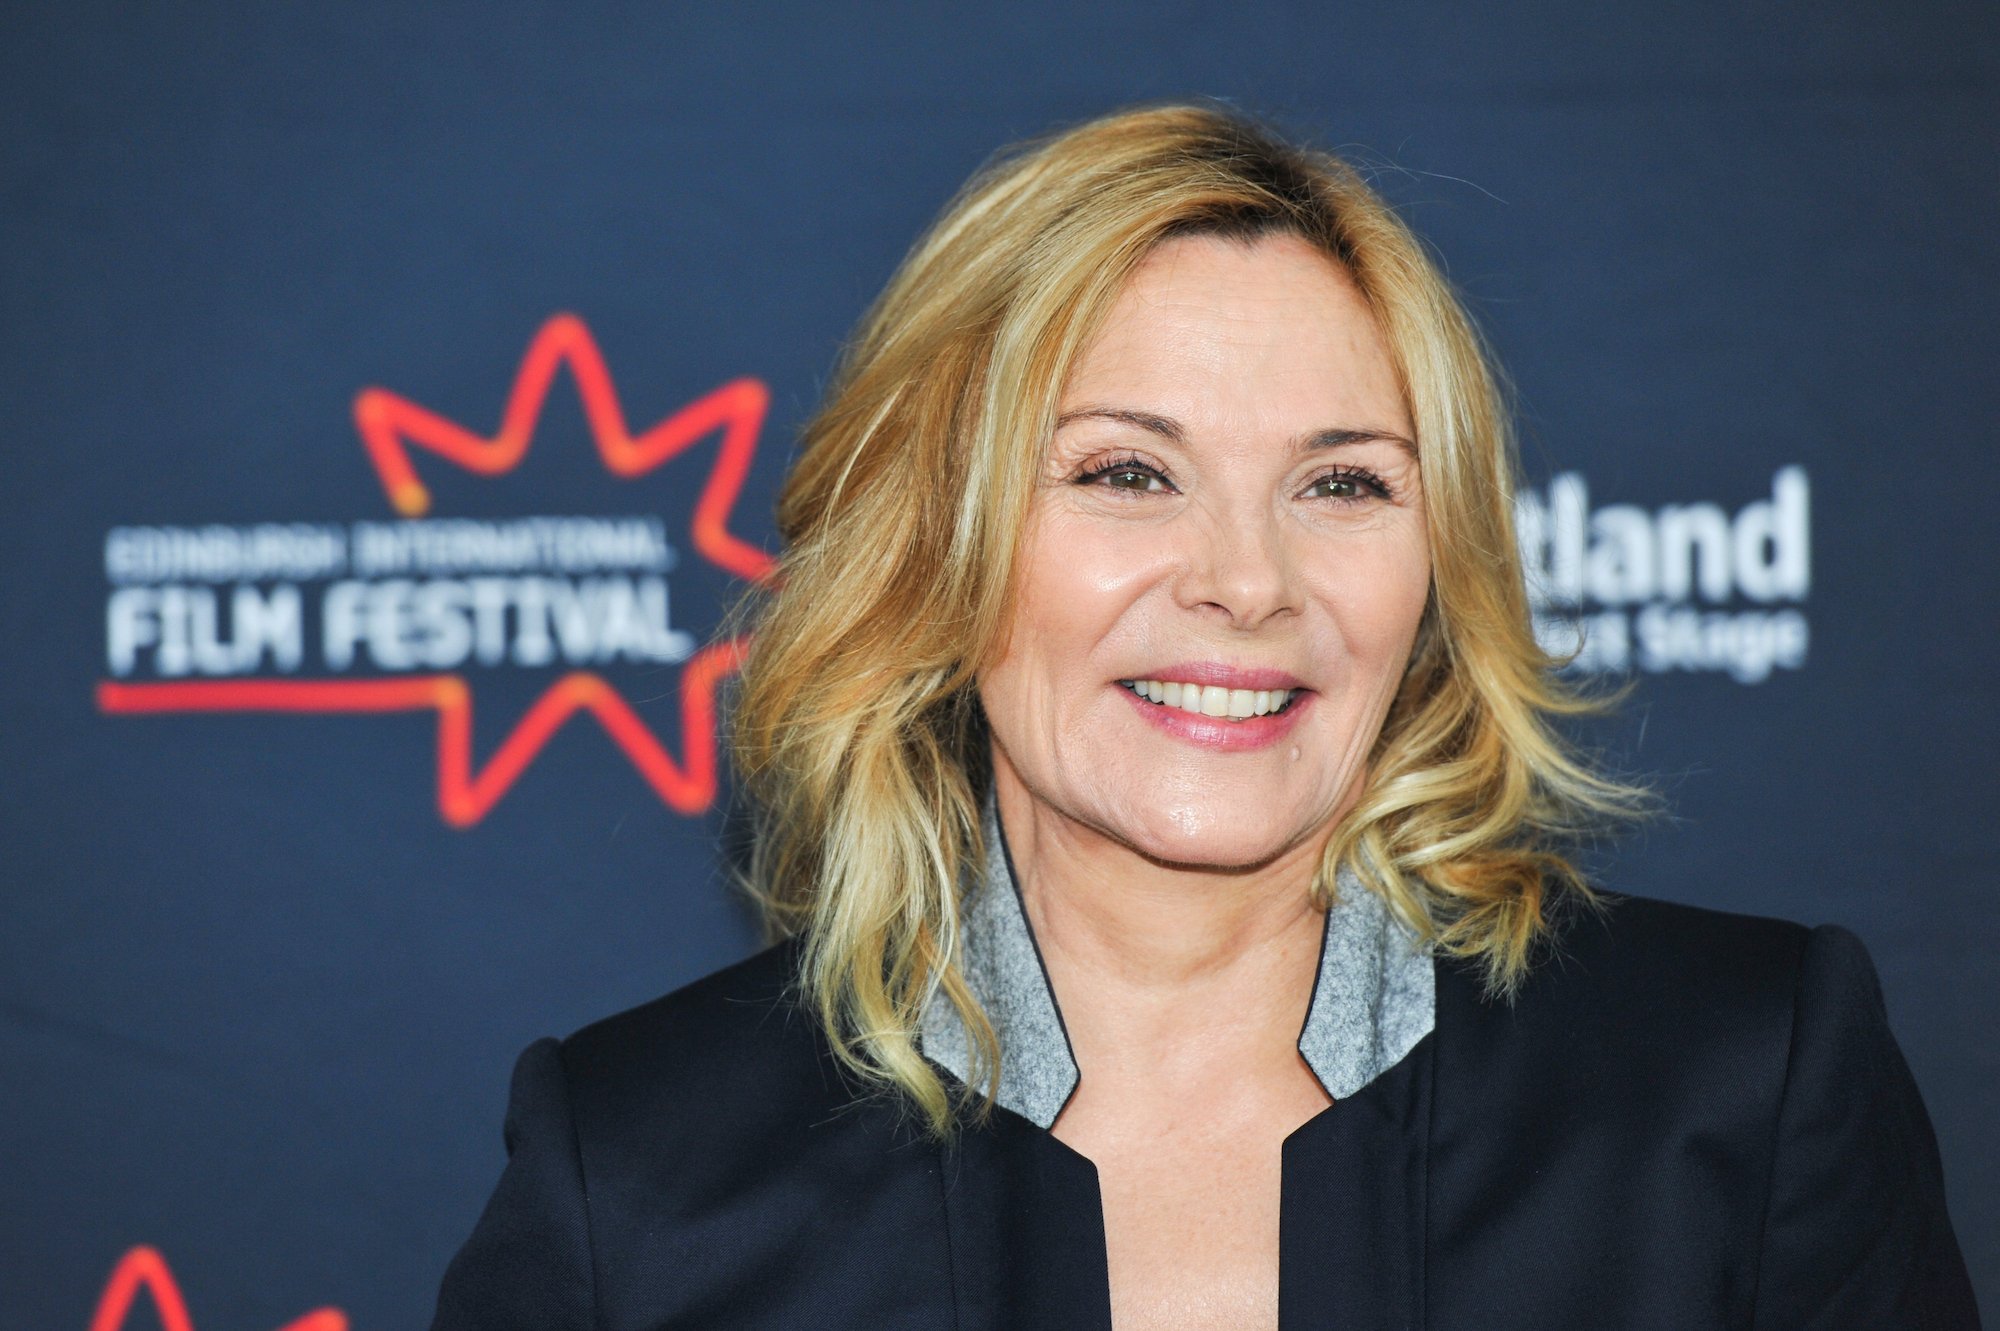 Kim Cattrall smiling in front of a blue background